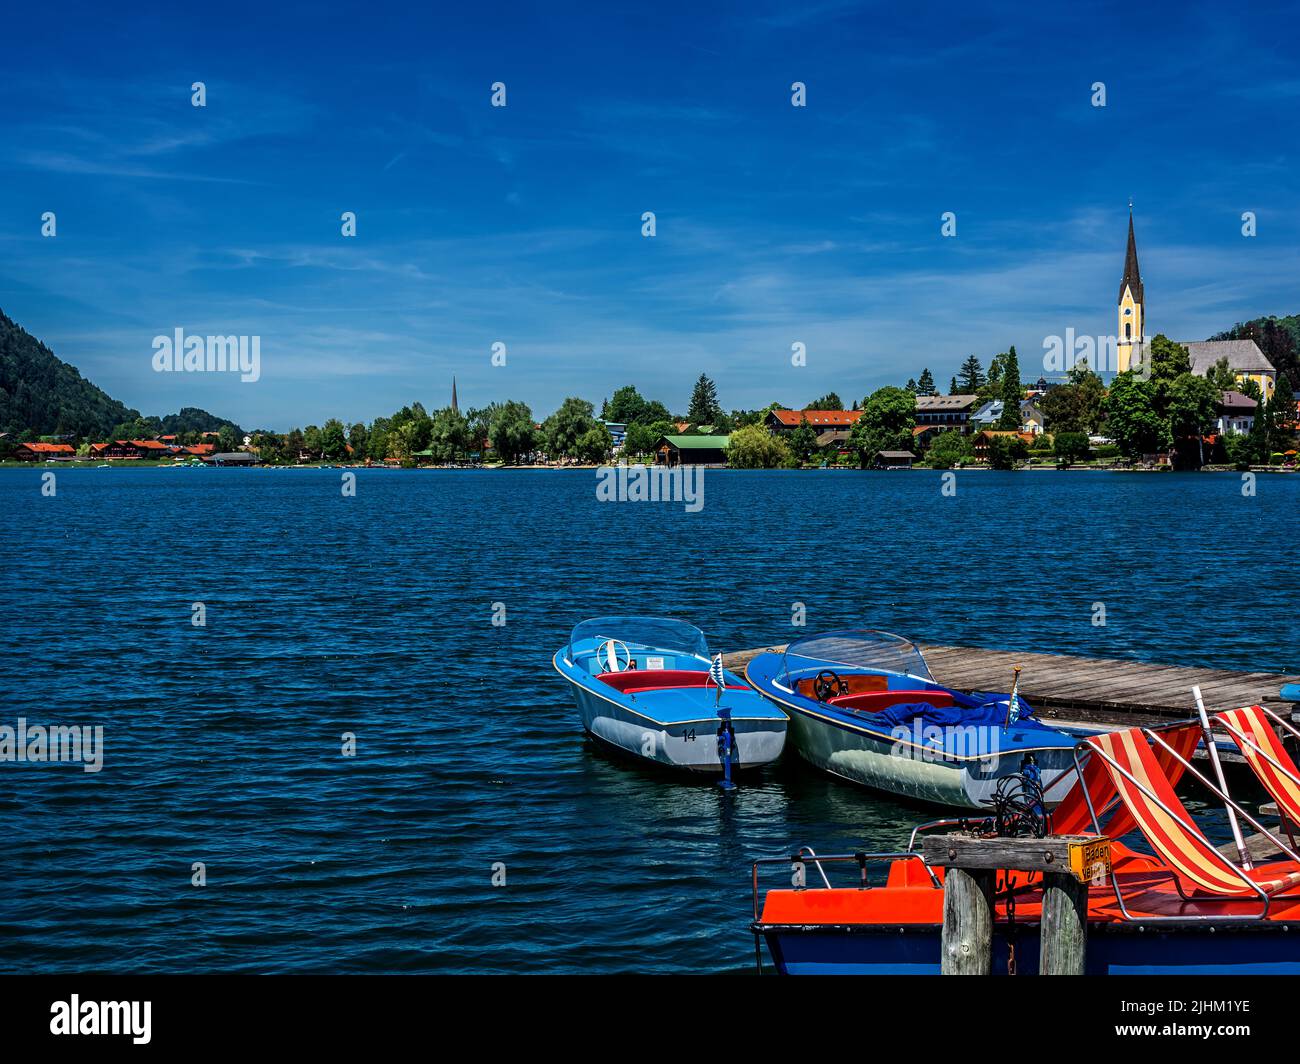 BAVARIA : Boats on the Schliersee Stock Photo